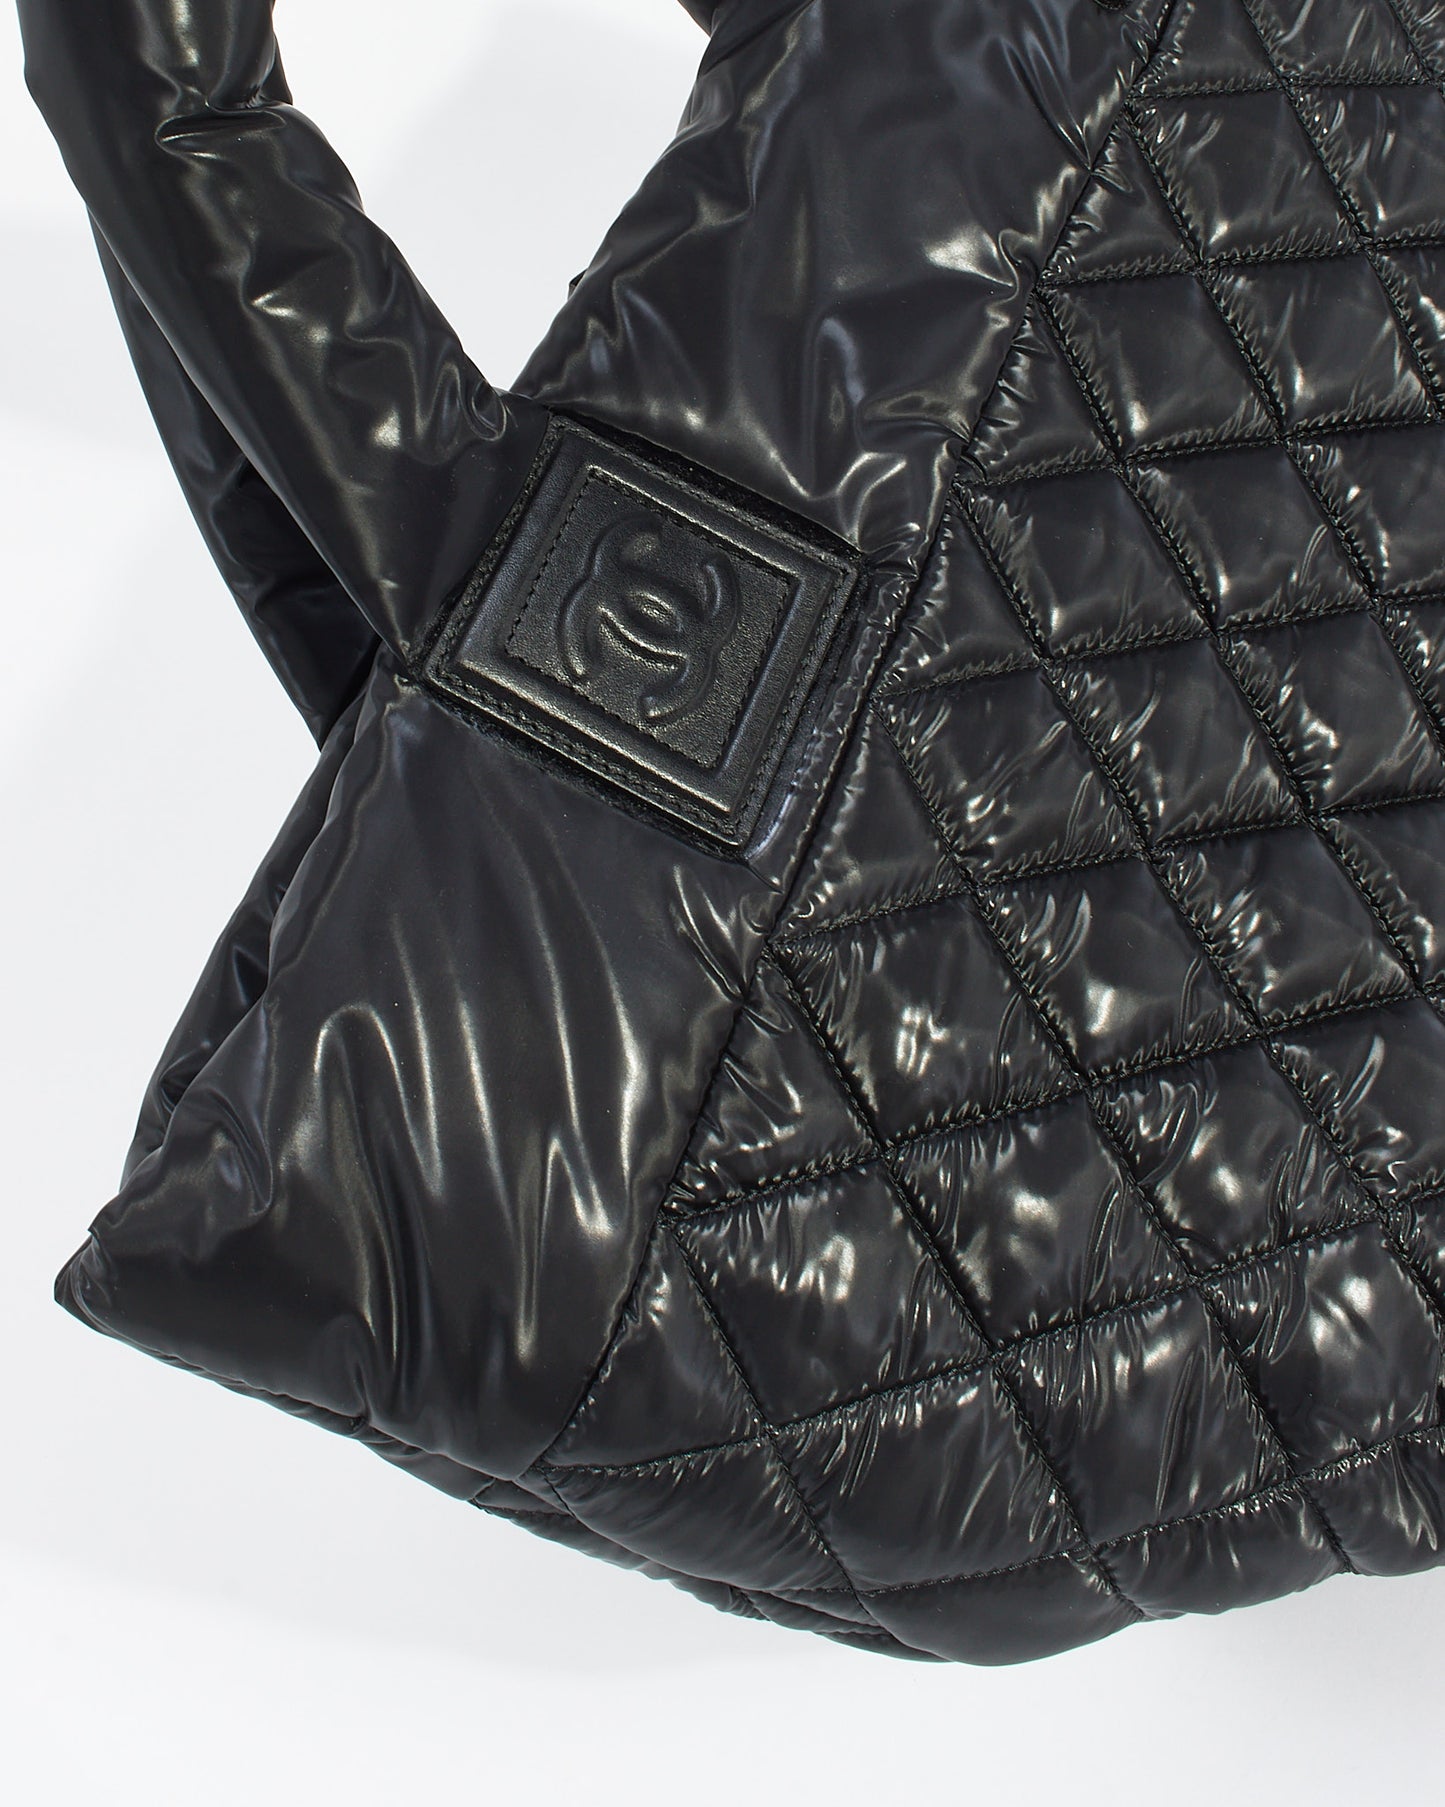 Chanel Black Nylon Quilted Coco Cocoon Reversible Small Tote